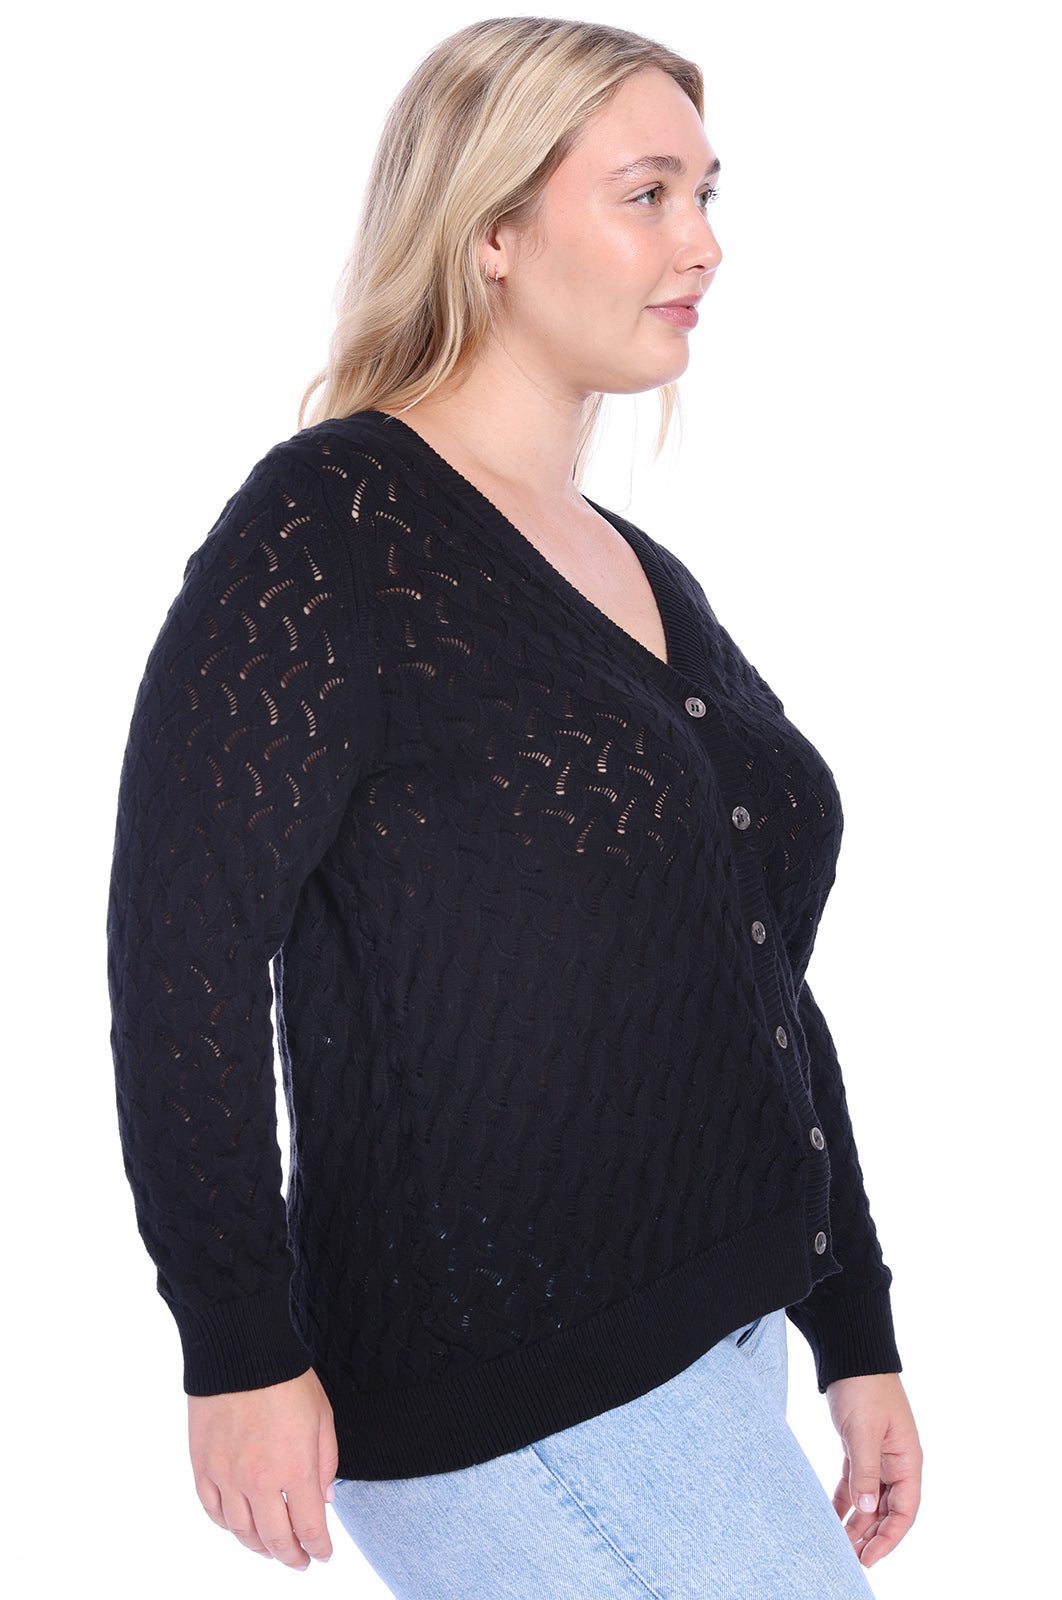 The Catherine - Women's Plus Size Cardigan in Charcoal – Apple